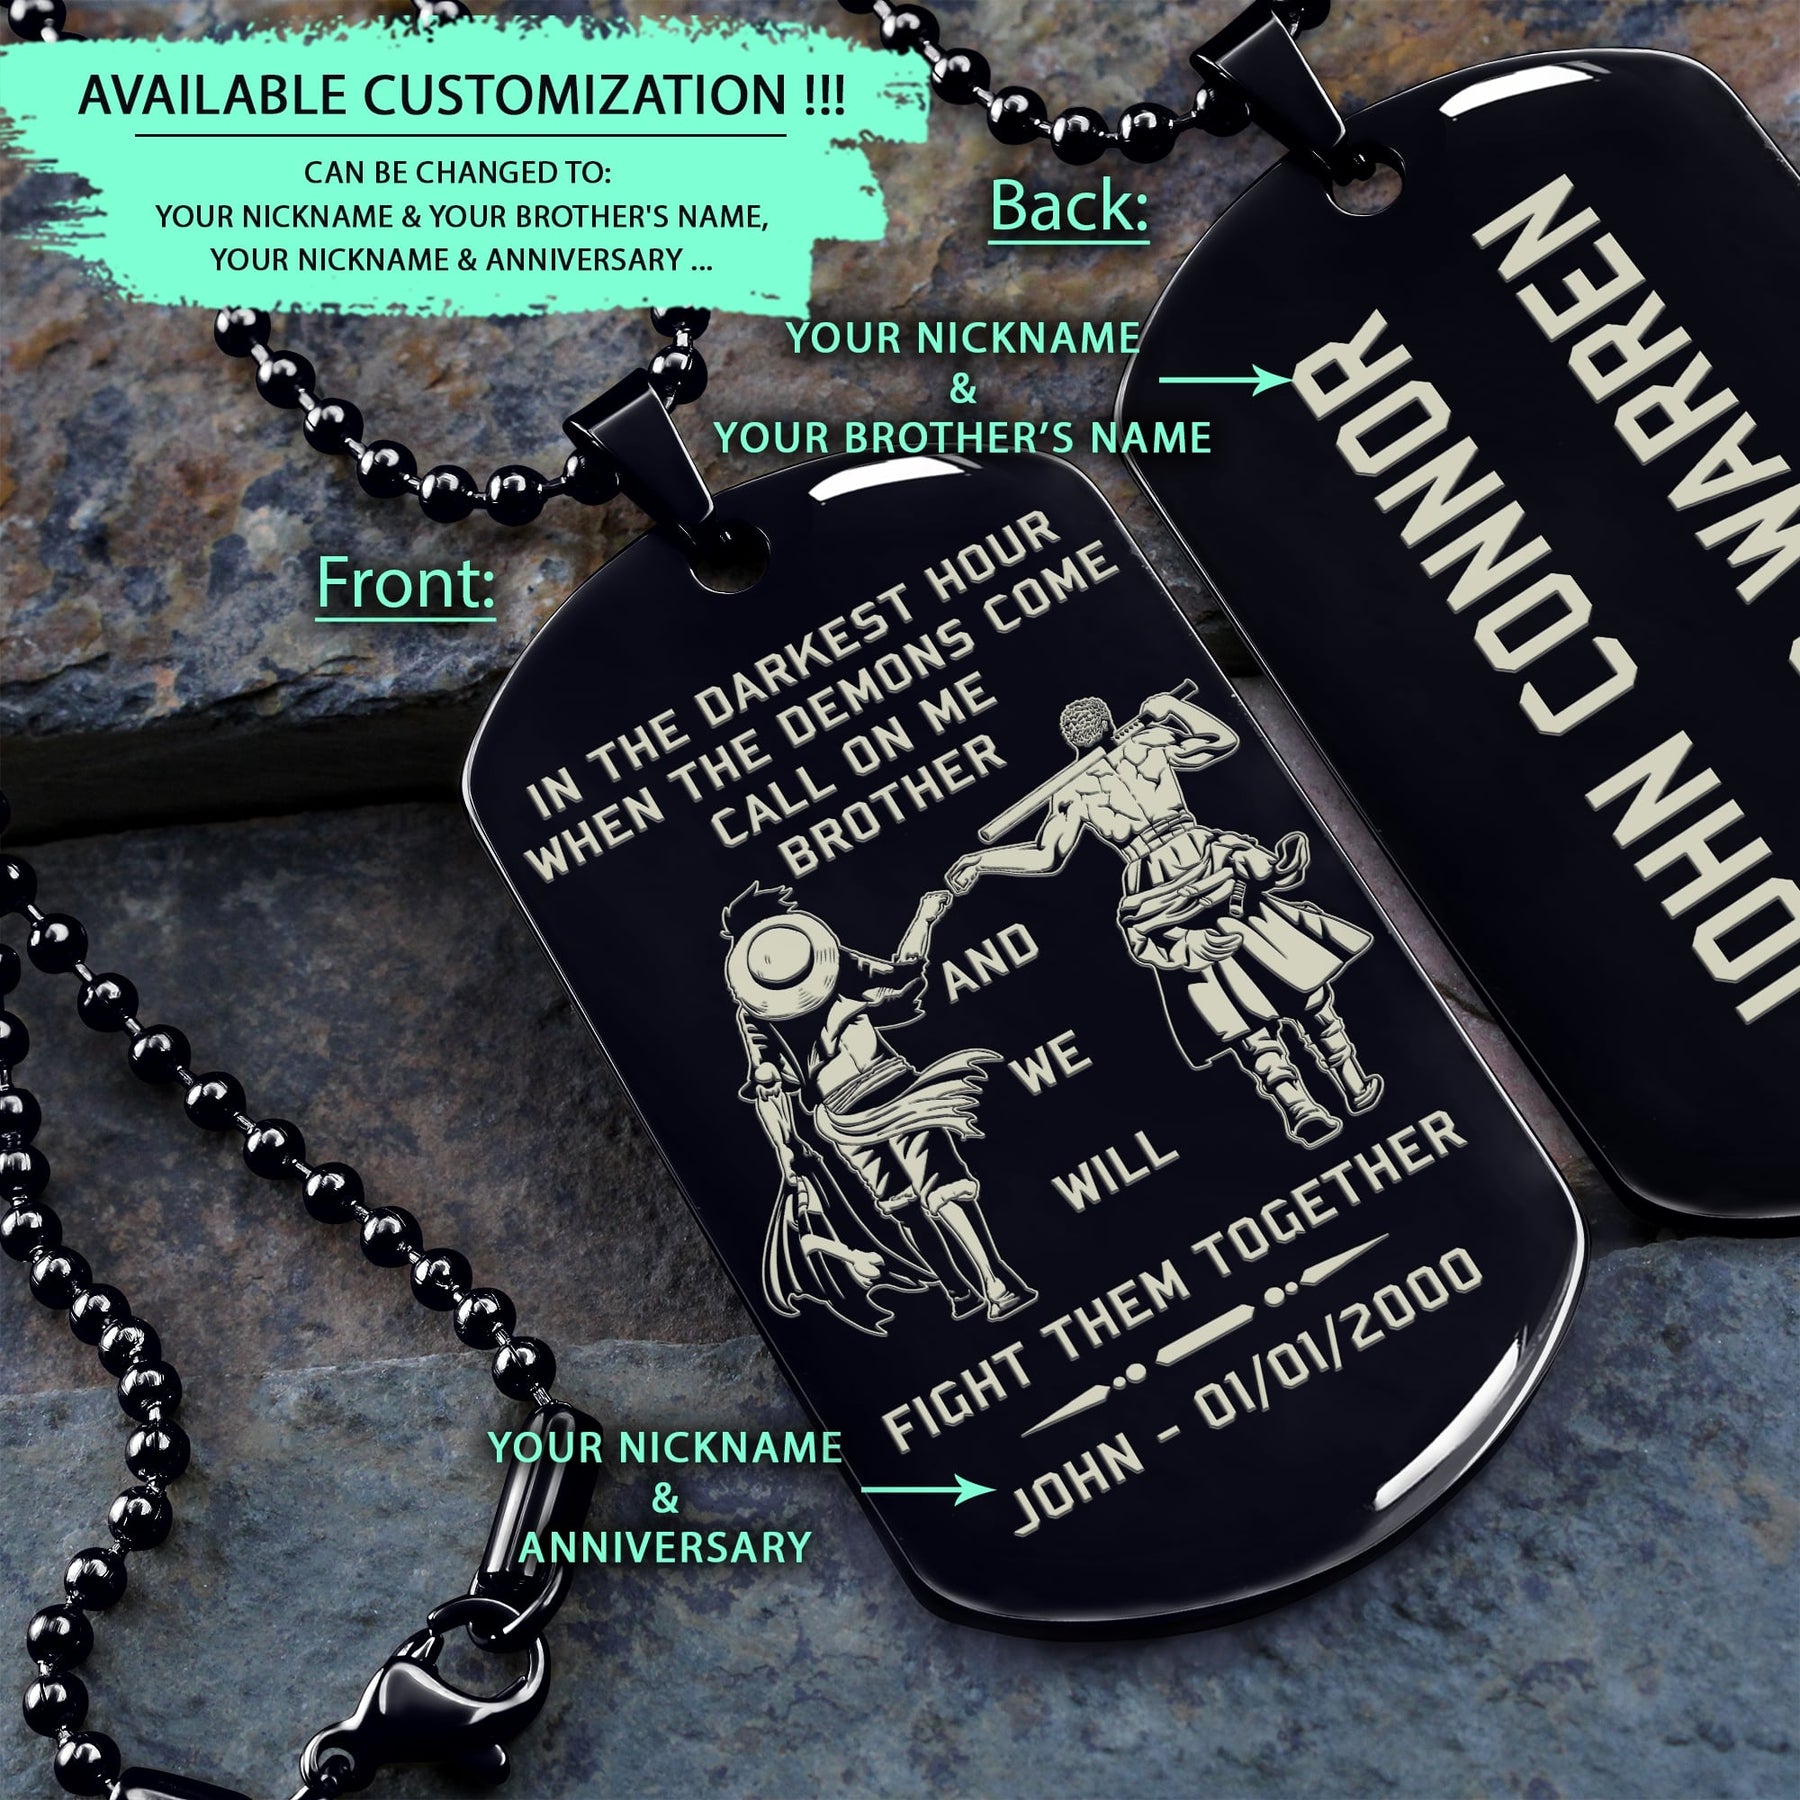 OPD004 - Call On me Brother - Monkey D. Luffy - Roronoa Zoro - One Piece Dog Tag - Engrave Black Dog Tag